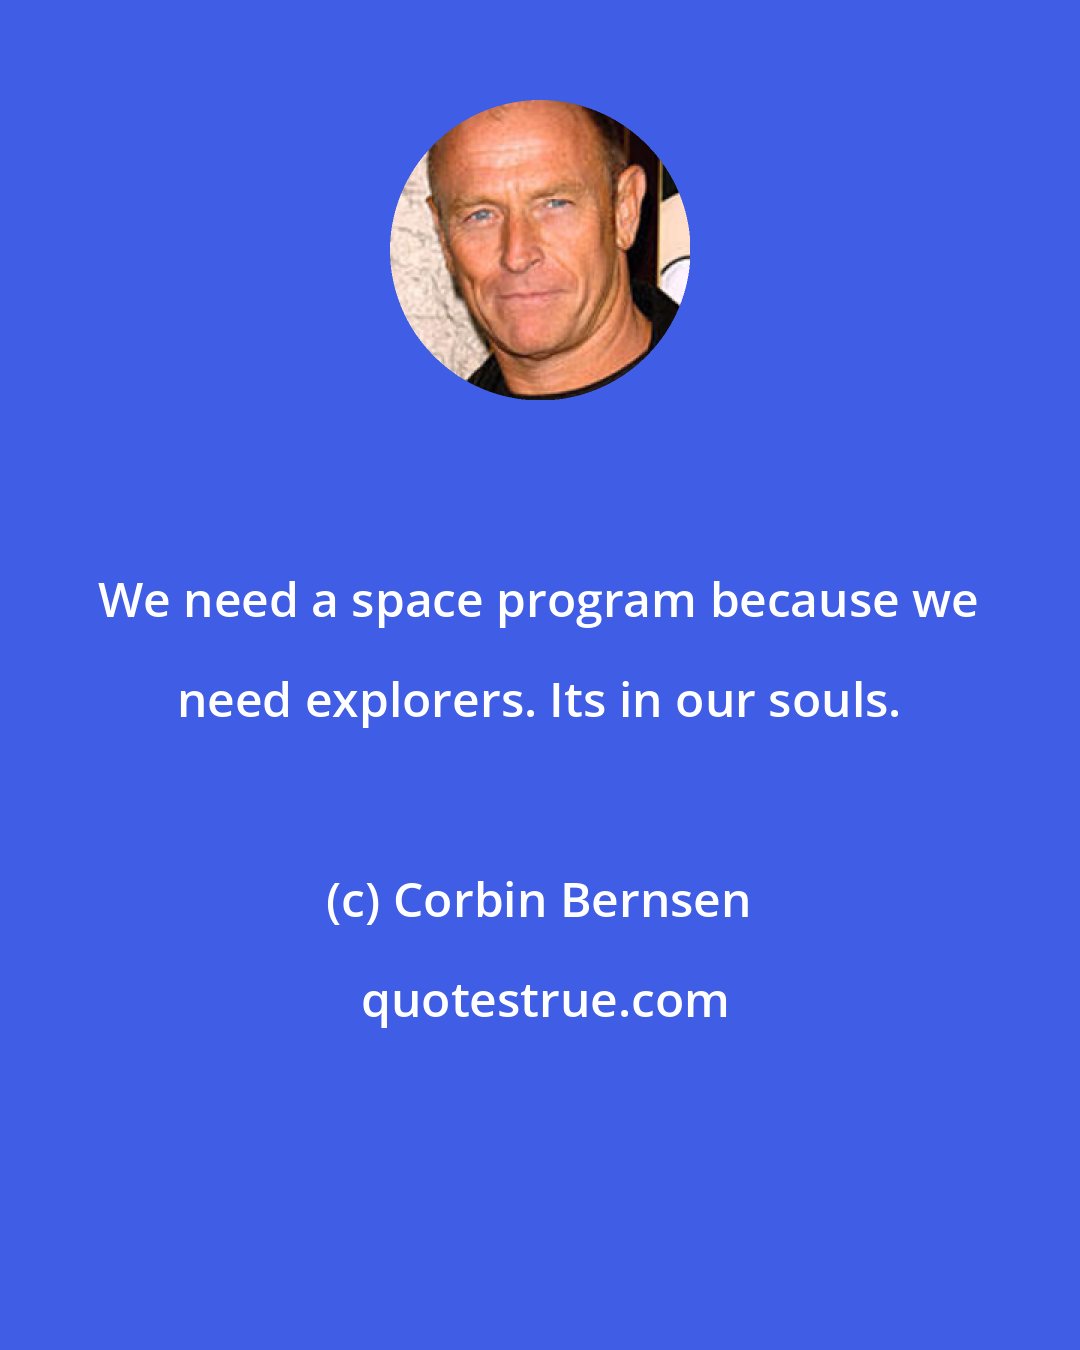 Corbin Bernsen: We need a space program because we need explorers. Its in our souls.